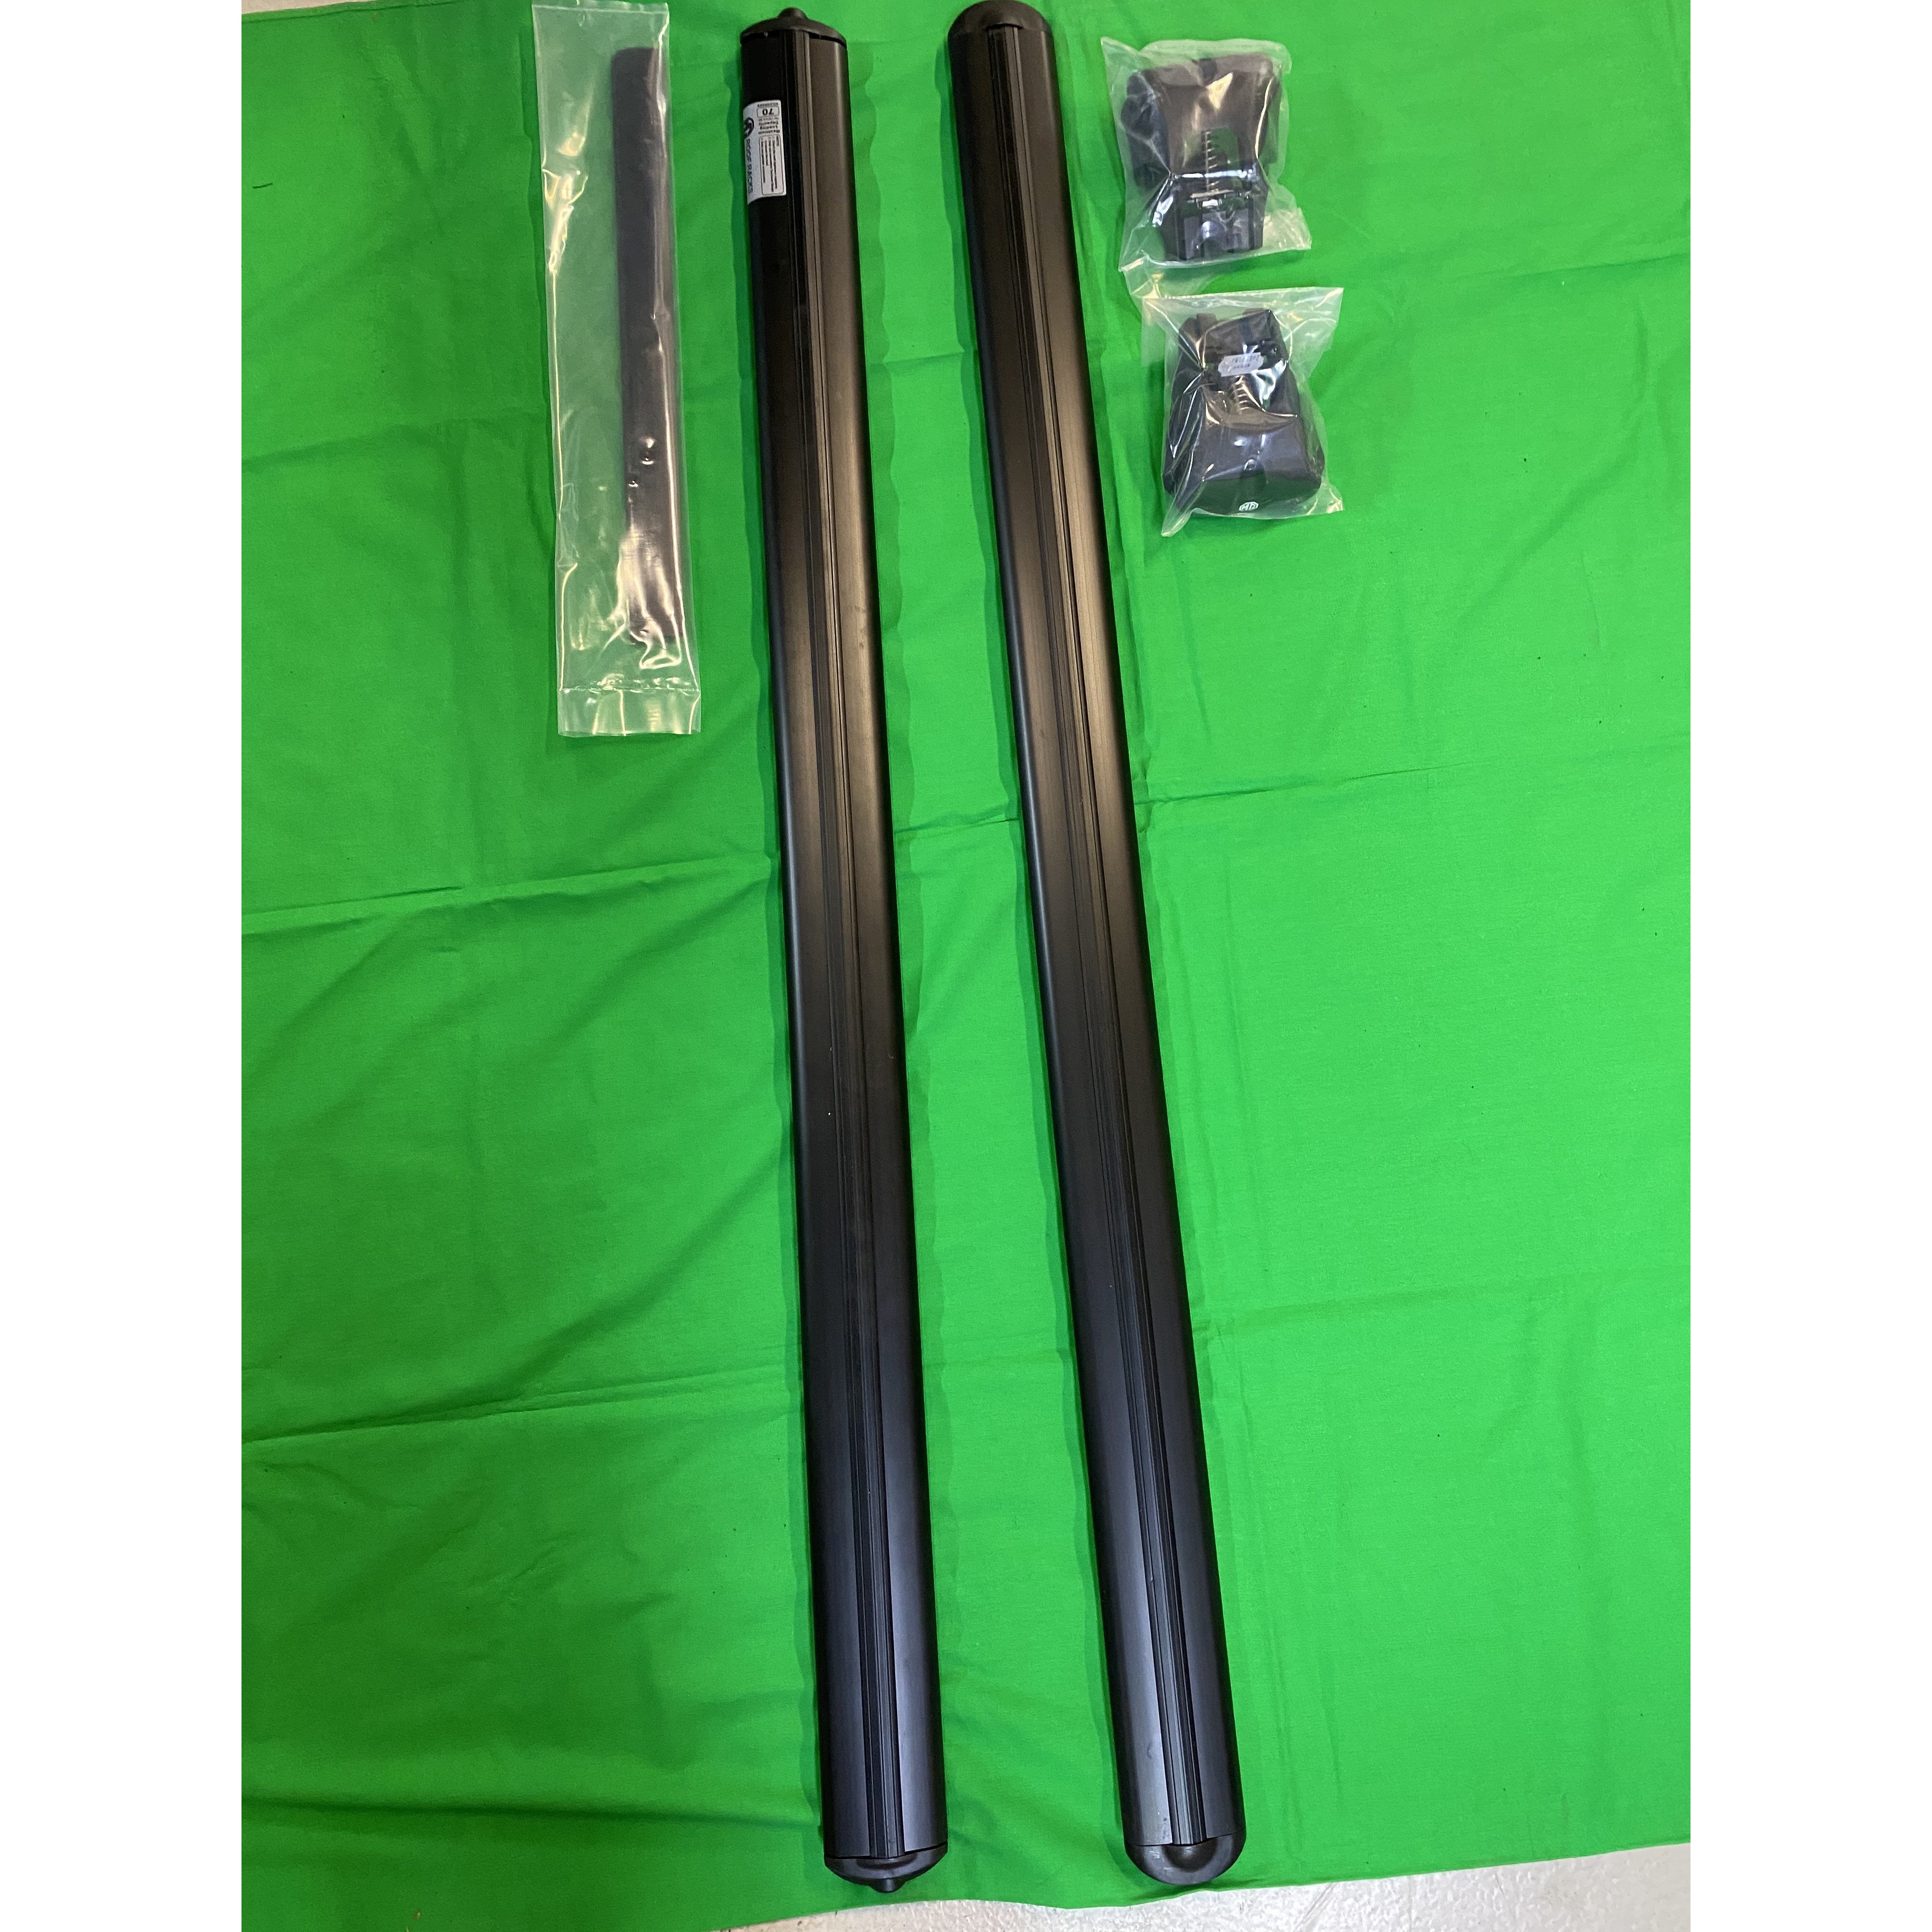 MG ZS, MG ZST, MG ZSEV Genuine Roof Rails kit - Black With Logo - Set Of 2 | ARG Parts & Accessories.